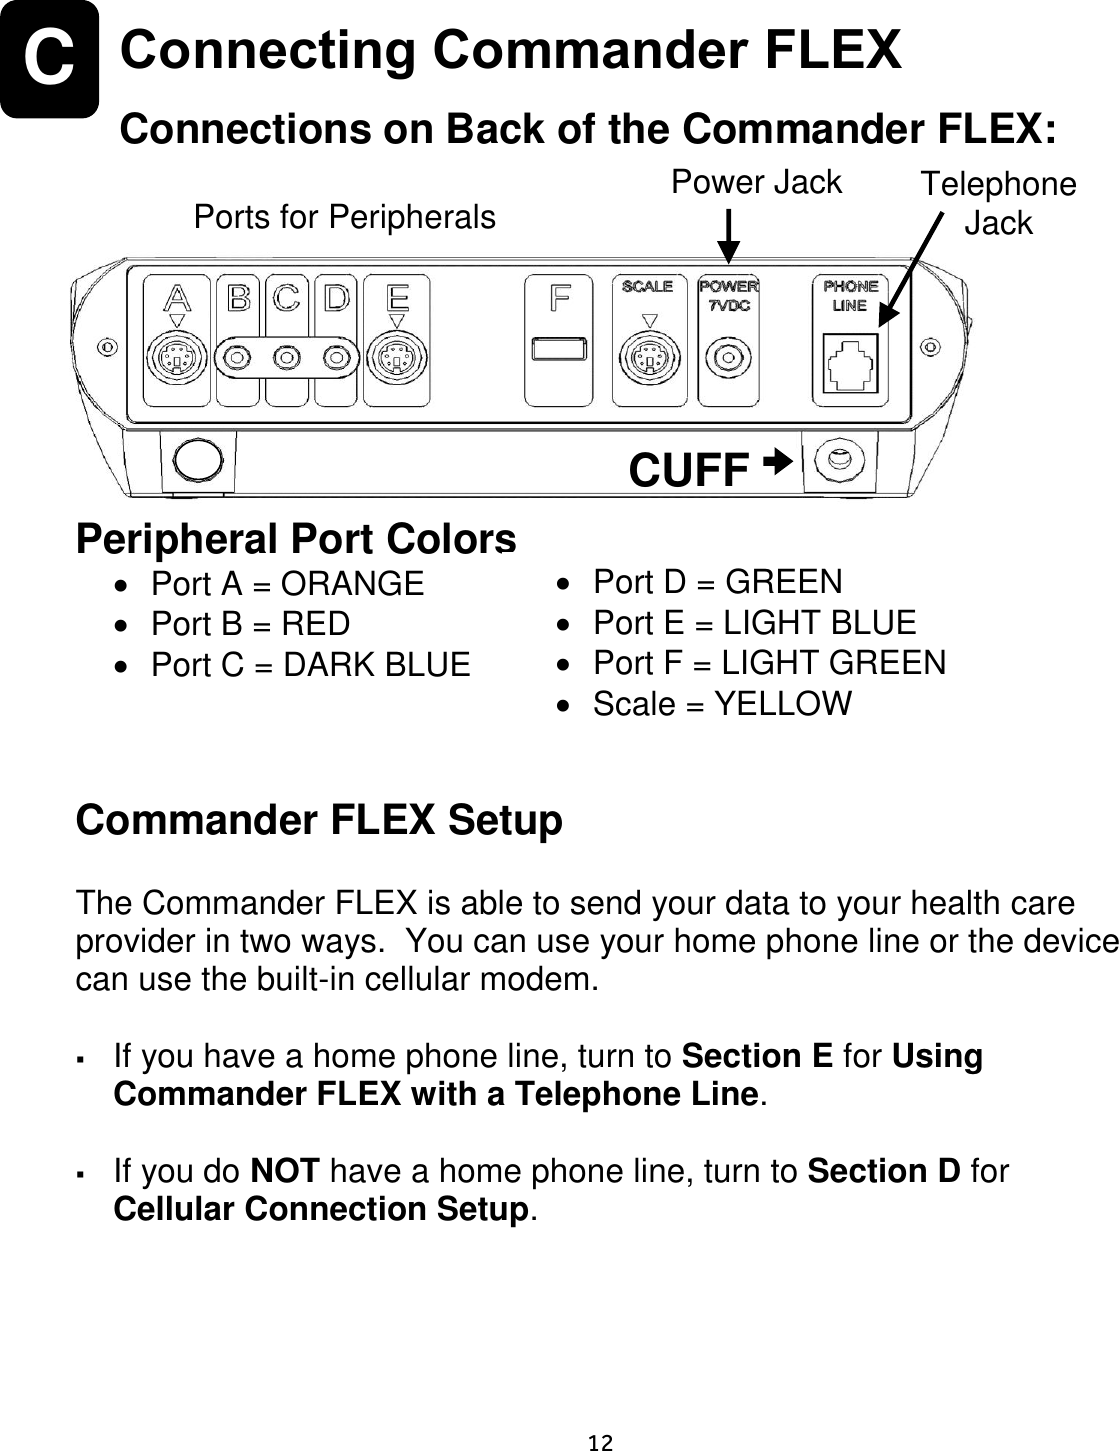     12  C  Connecting Commander FLEX  Connections on Back of the Commander FLEX:       Peripheral Port Colors   Port A = ORANGE   Port B = RED   Port C = DARK BLUE    Commander FLEX Setup  The Commander FLEX is able to send your data to your health care provider in two ways.  You can use your home phone line or the device can use the built-in cellular modem.   If you have a home phone line, turn to Section E for Using Commander FLEX with a Telephone Line.    If you do NOT have a home phone line, turn to Section D for Cellular Connection Setup.     CUFF Telephone Jack Power Jack Ports for Peripherals   Port D = GREEN   Port E = LIGHT BLUE   Port F = LIGHT GREEN   Scale = YELLOW 